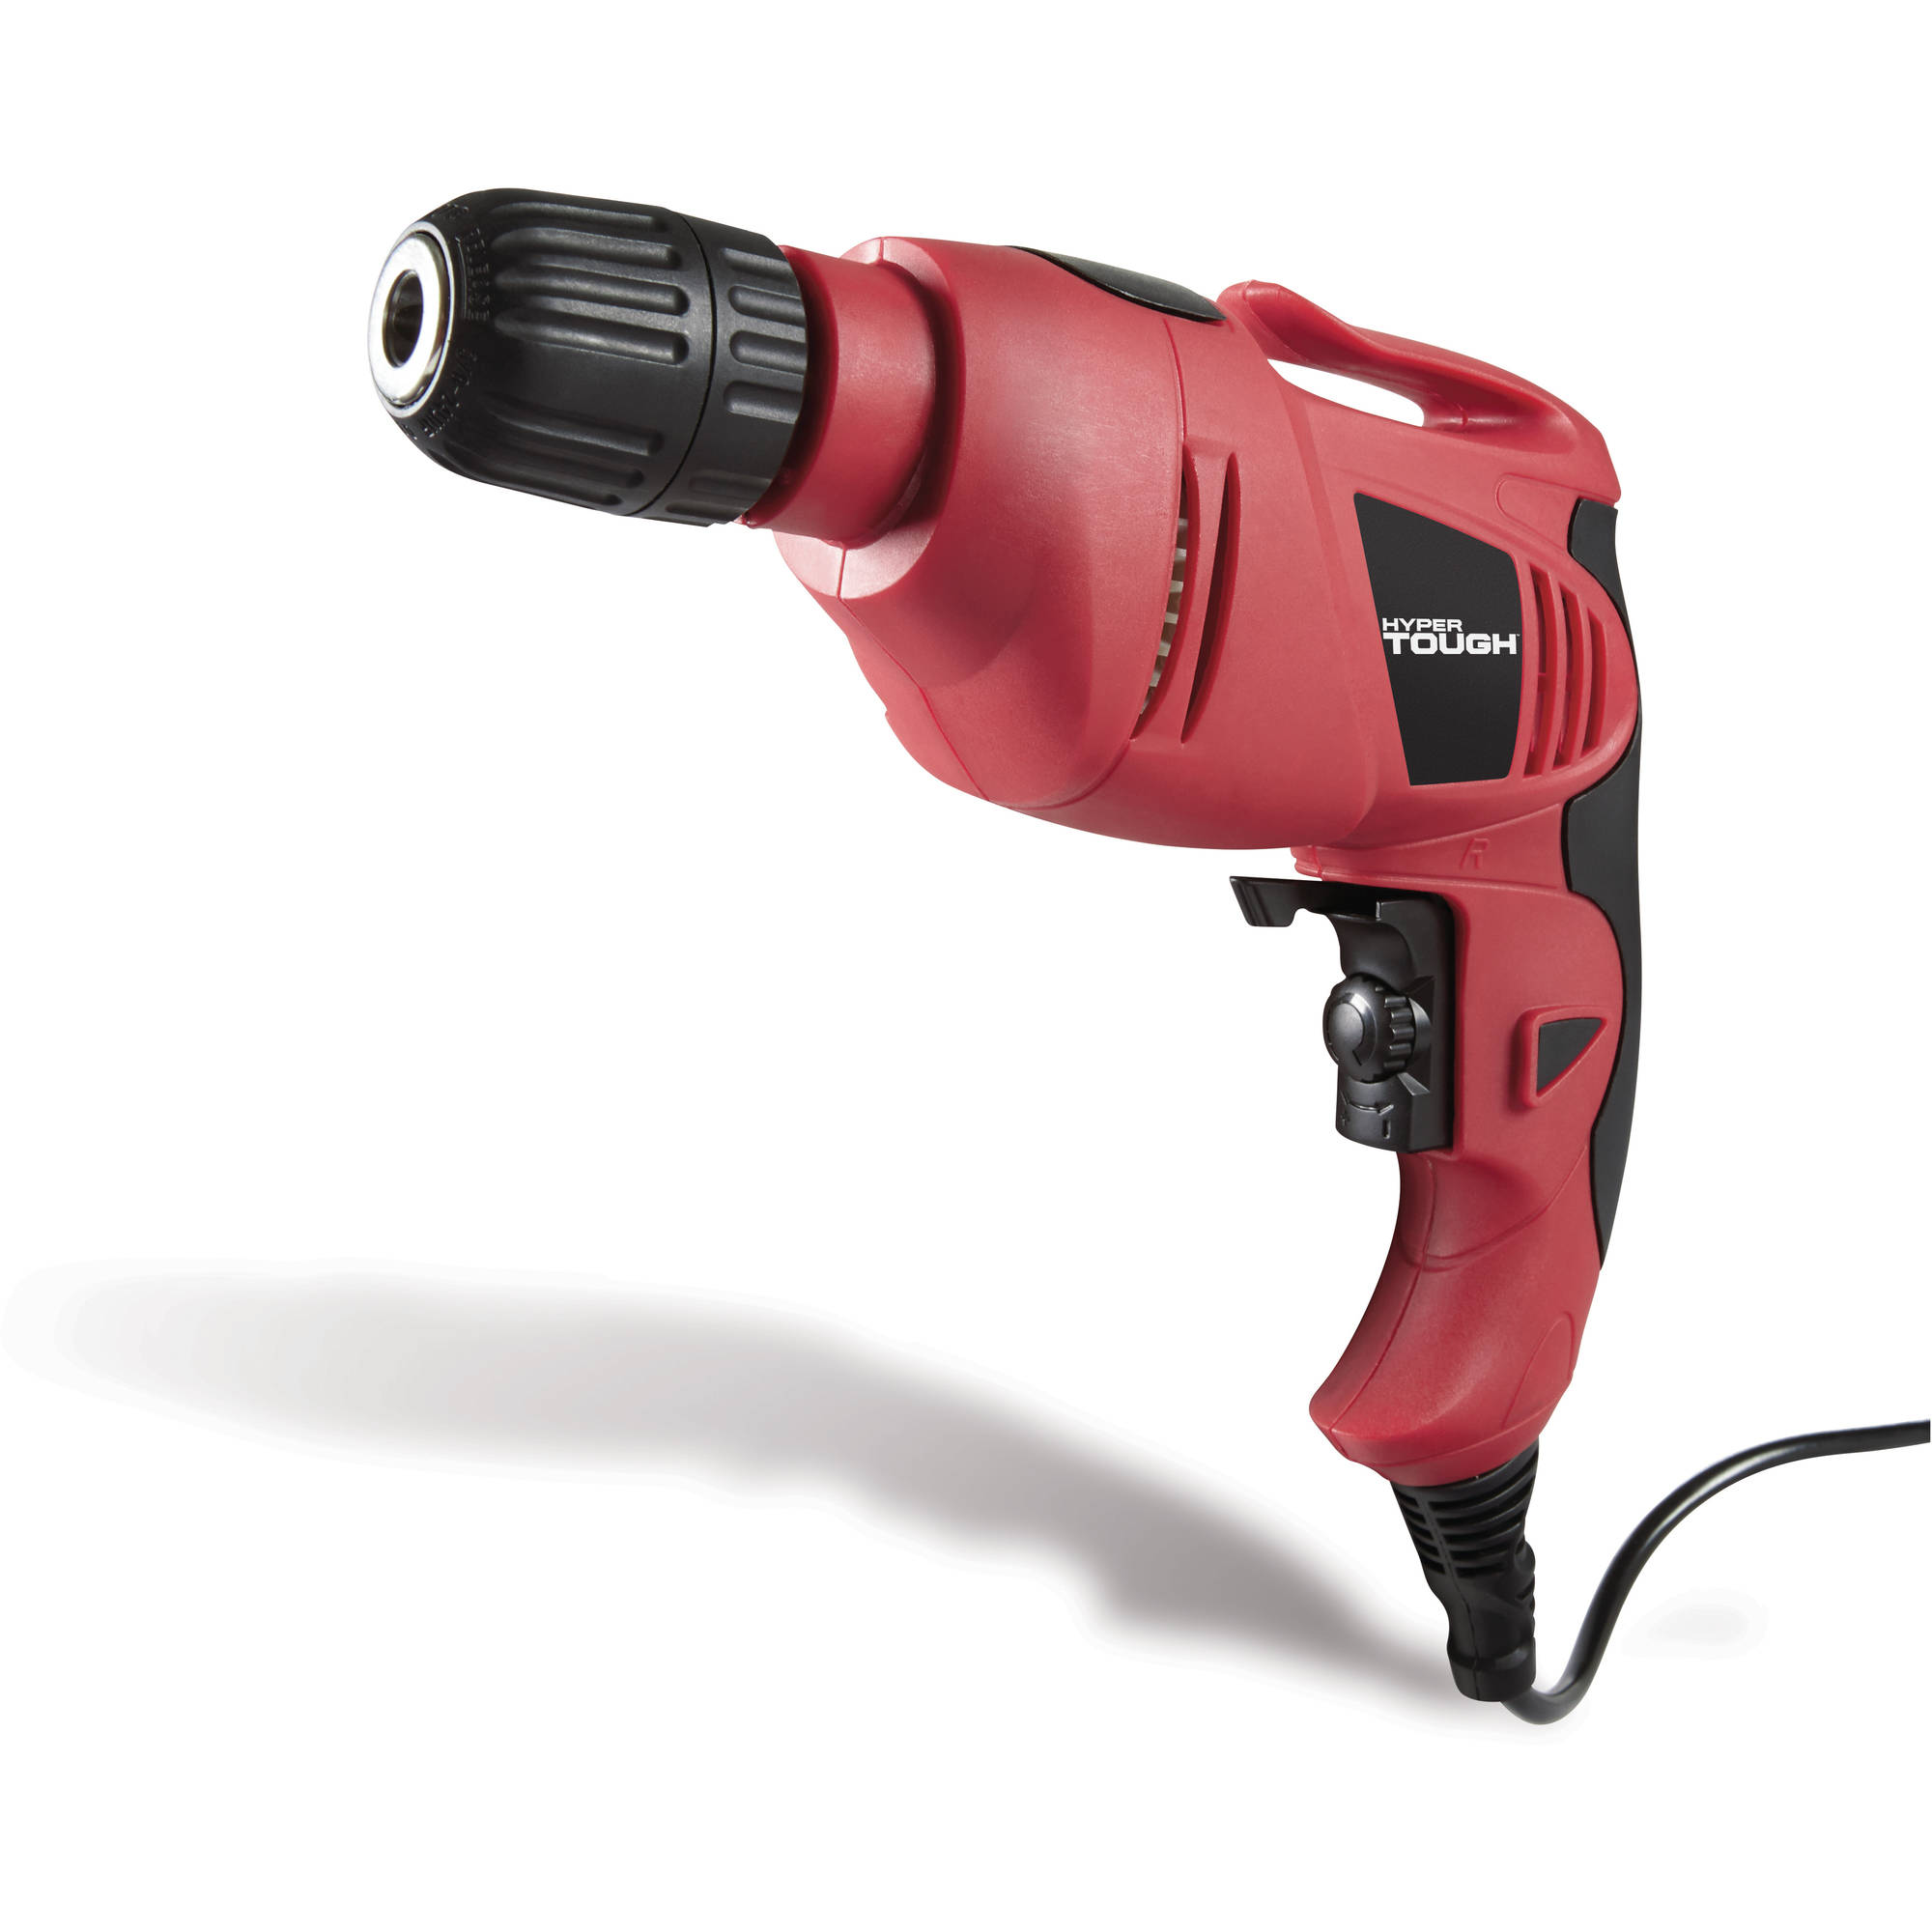 Red Electric Drill Variable speed trigger Power Tools Hyper Tough,Variable speed